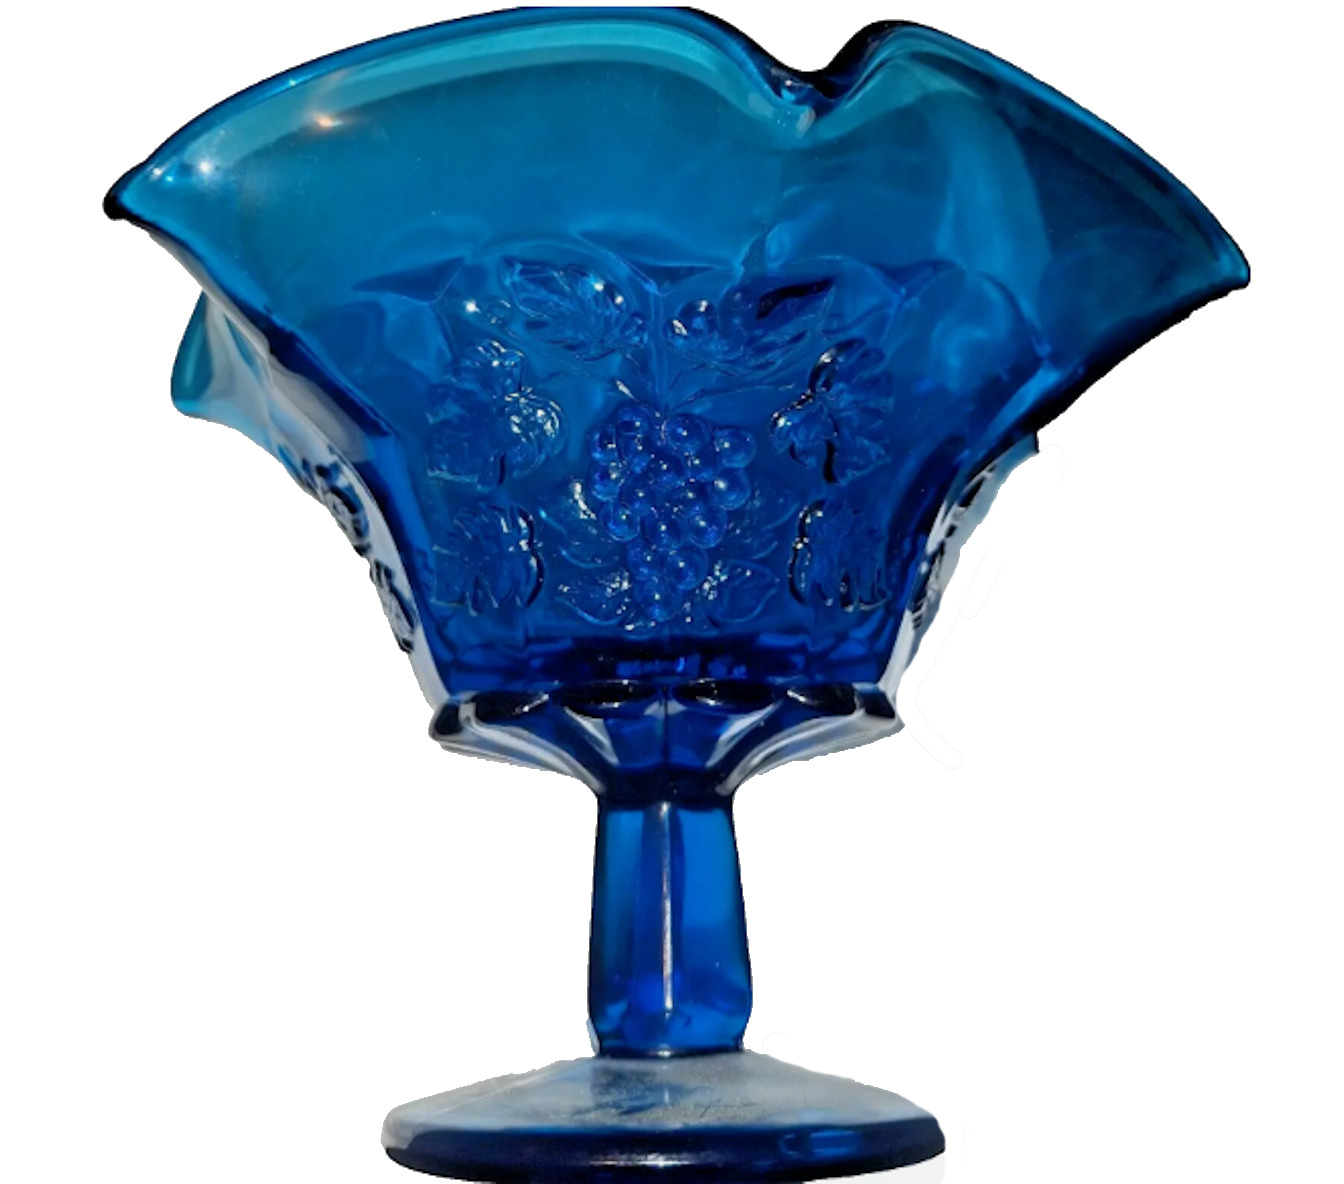 Vintage Blue Pressed Glass Footed Bowl Compote Candy Dish Ruffled Edge